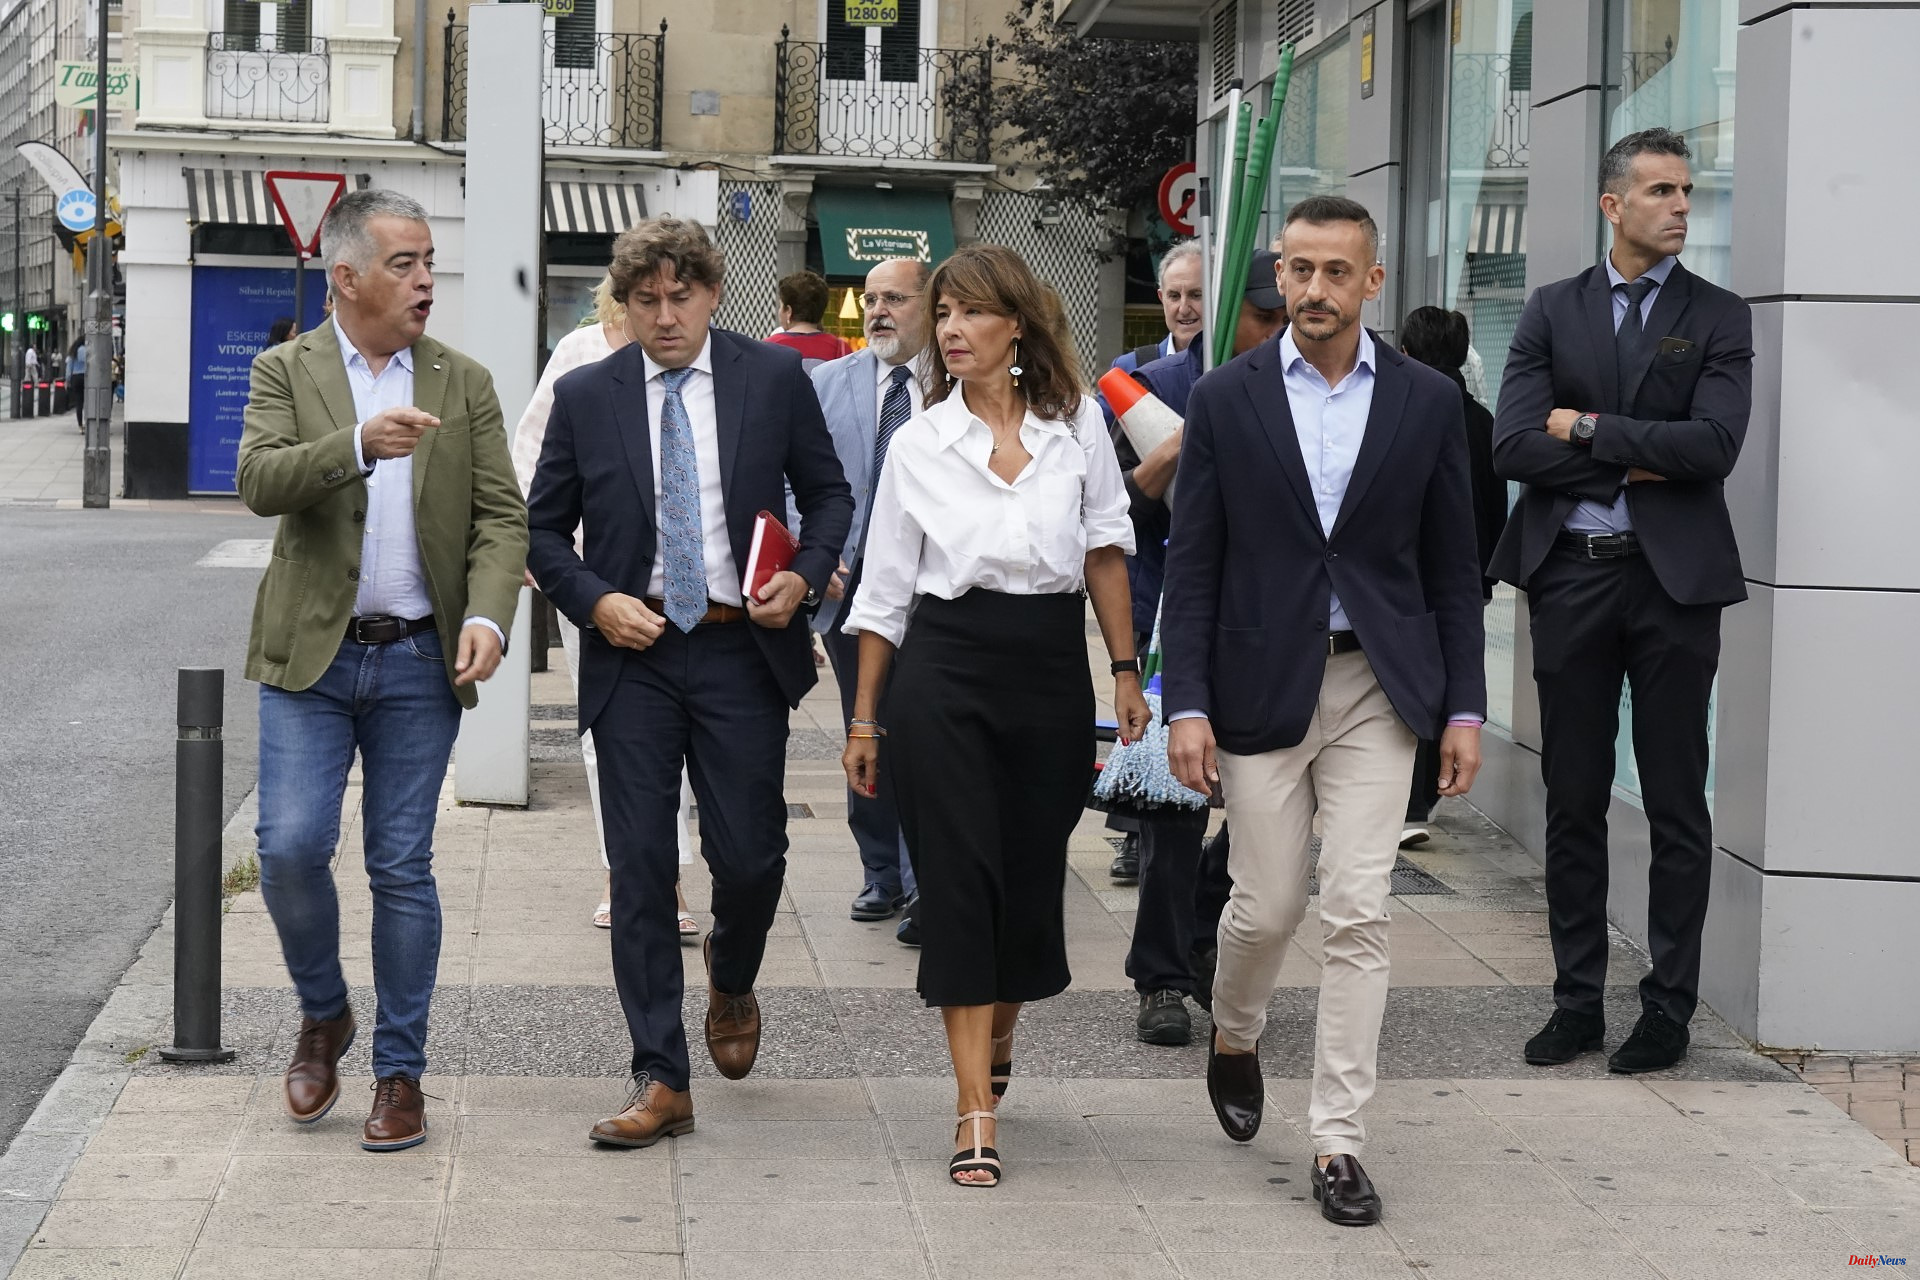 Spain Andueza distances himself from the PNV with a harsh allegation against Urkullu and opens the Basque electoral contest